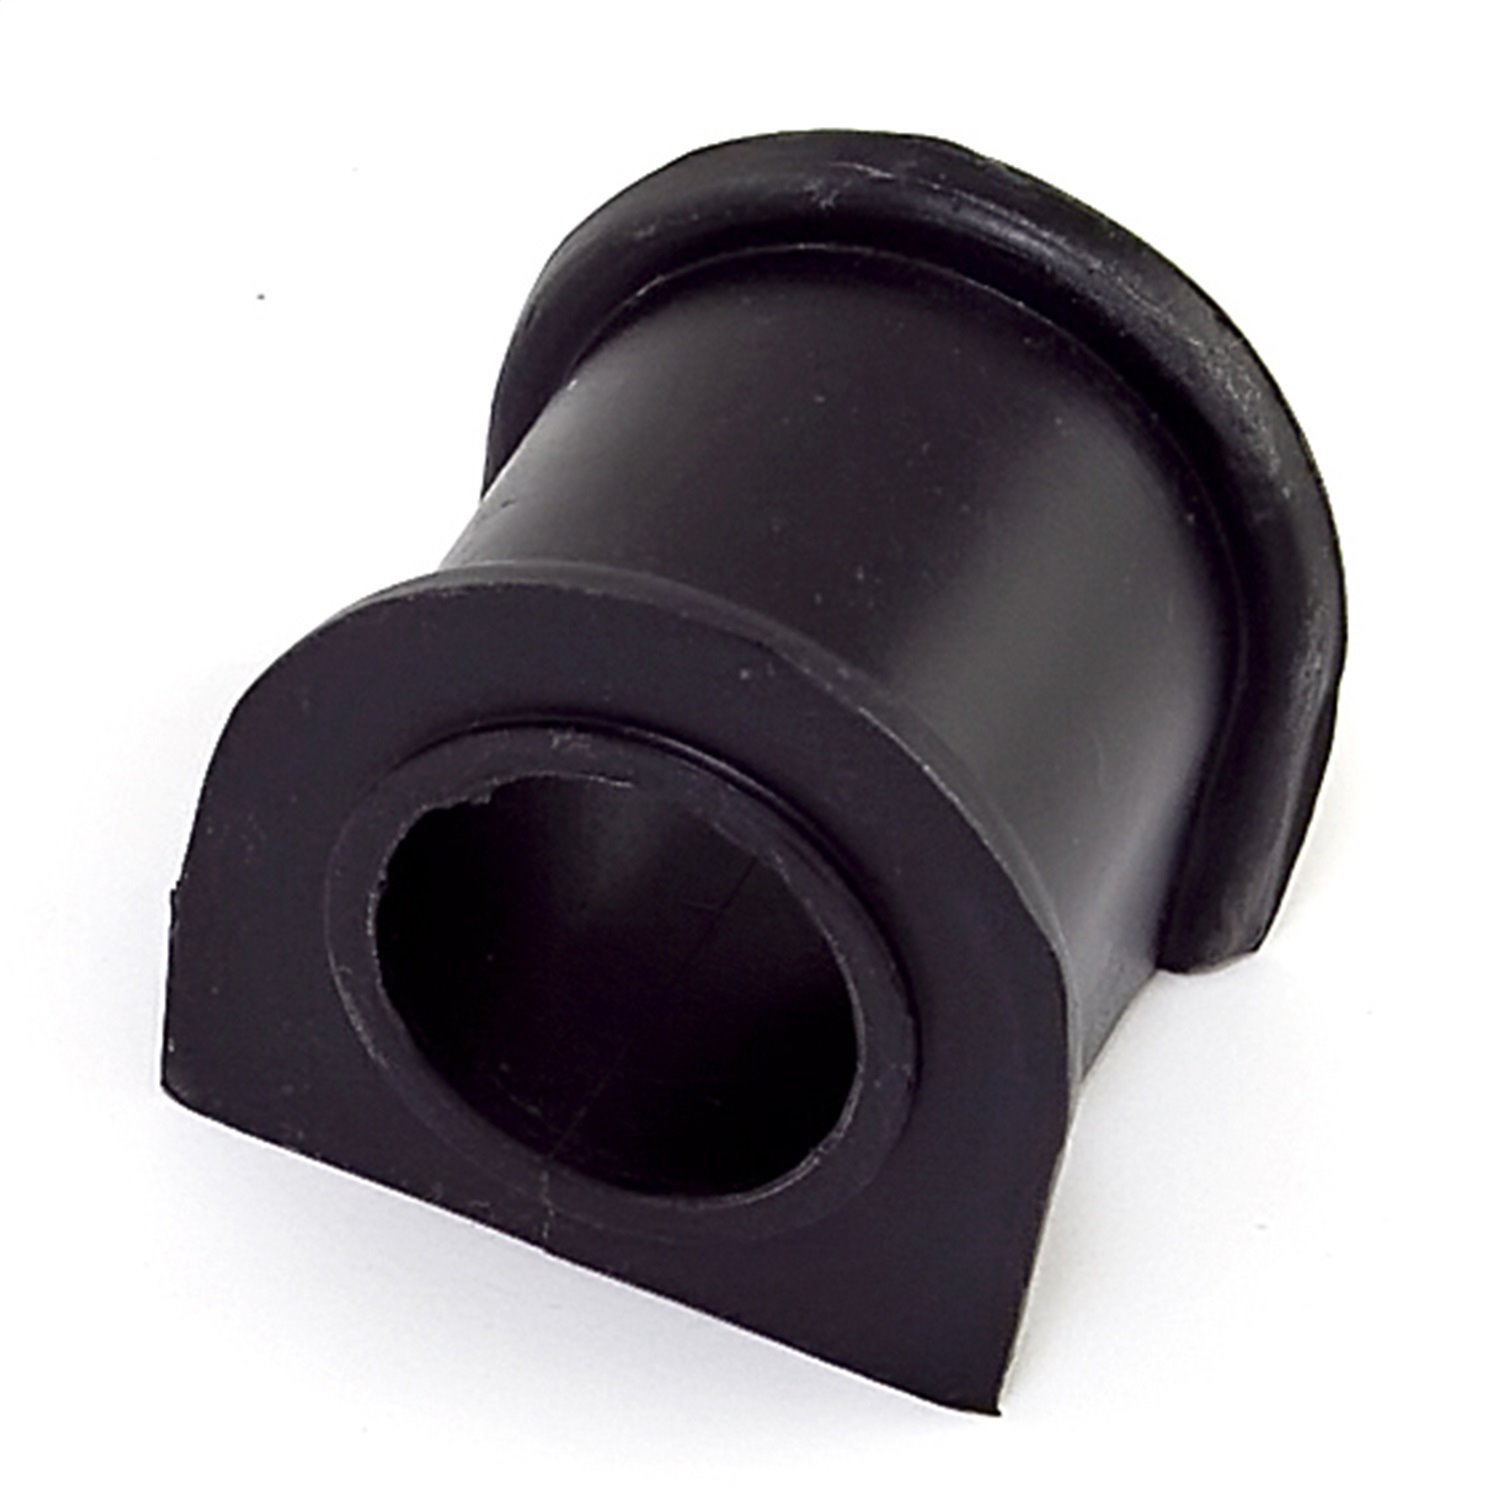 Replacement front sway bar bushing from Omix-ADA, Fits 84-89 Jeep Cherokee XJ26 mm I.D.